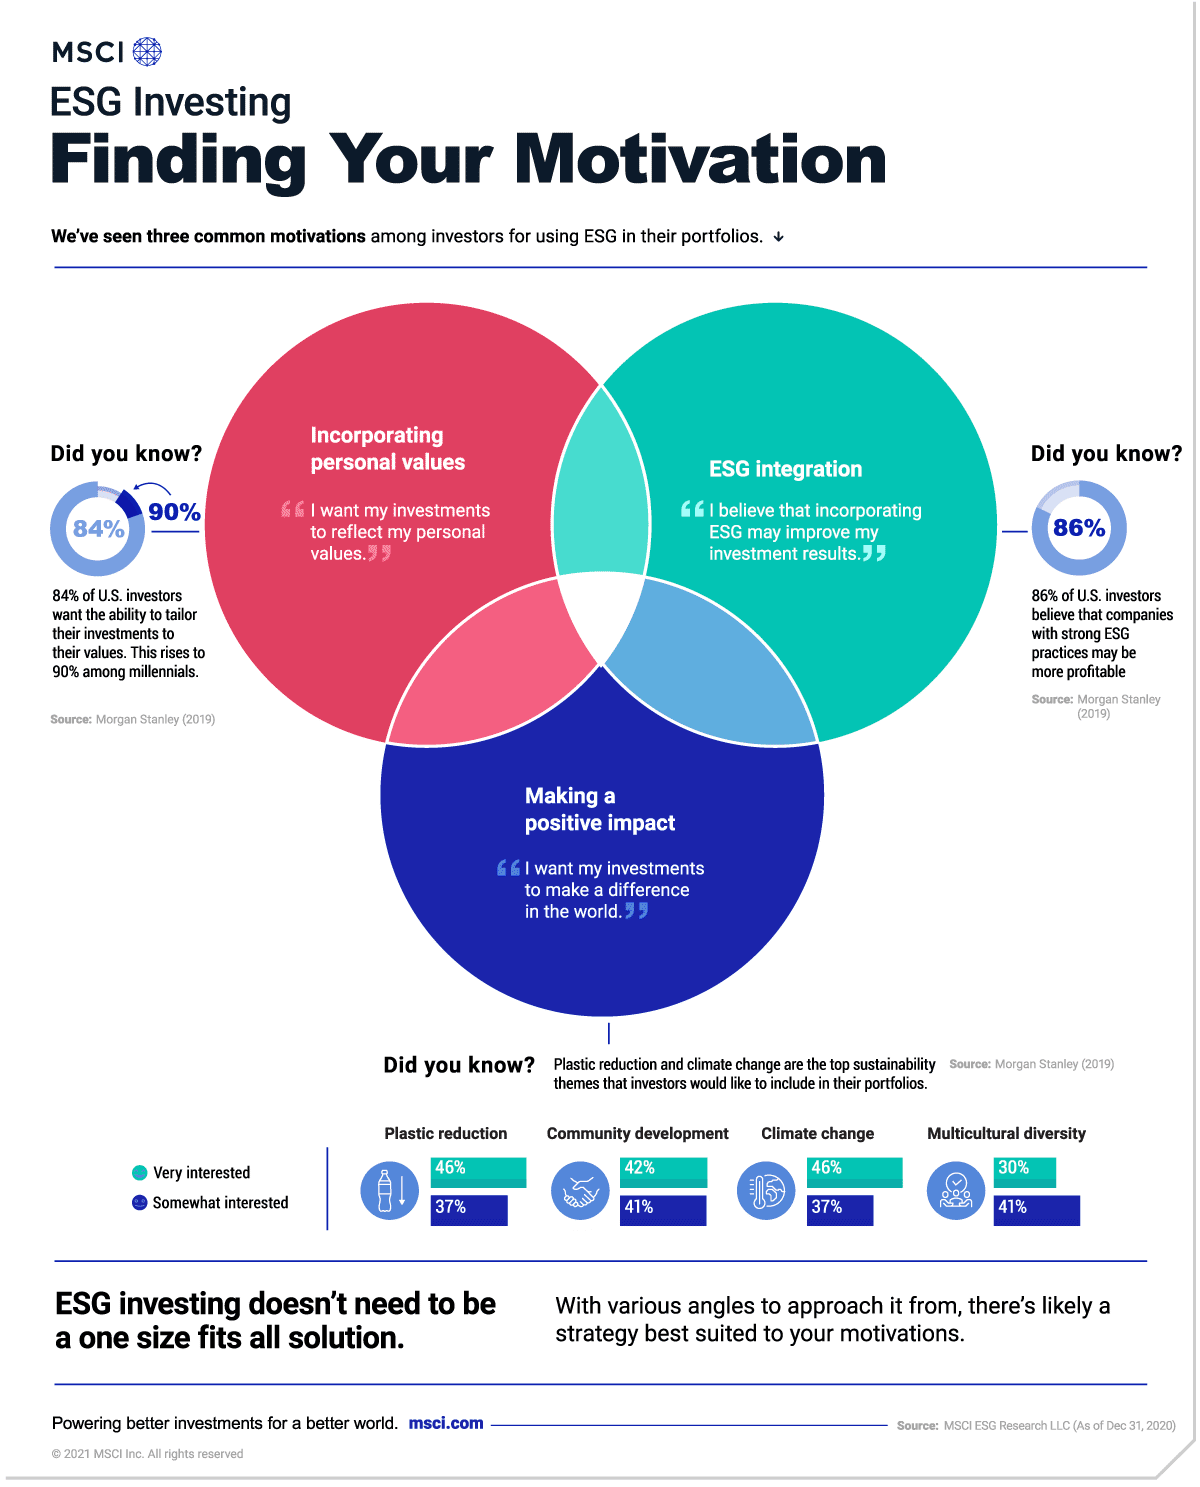 ESG Investing: Finding Your Motivation